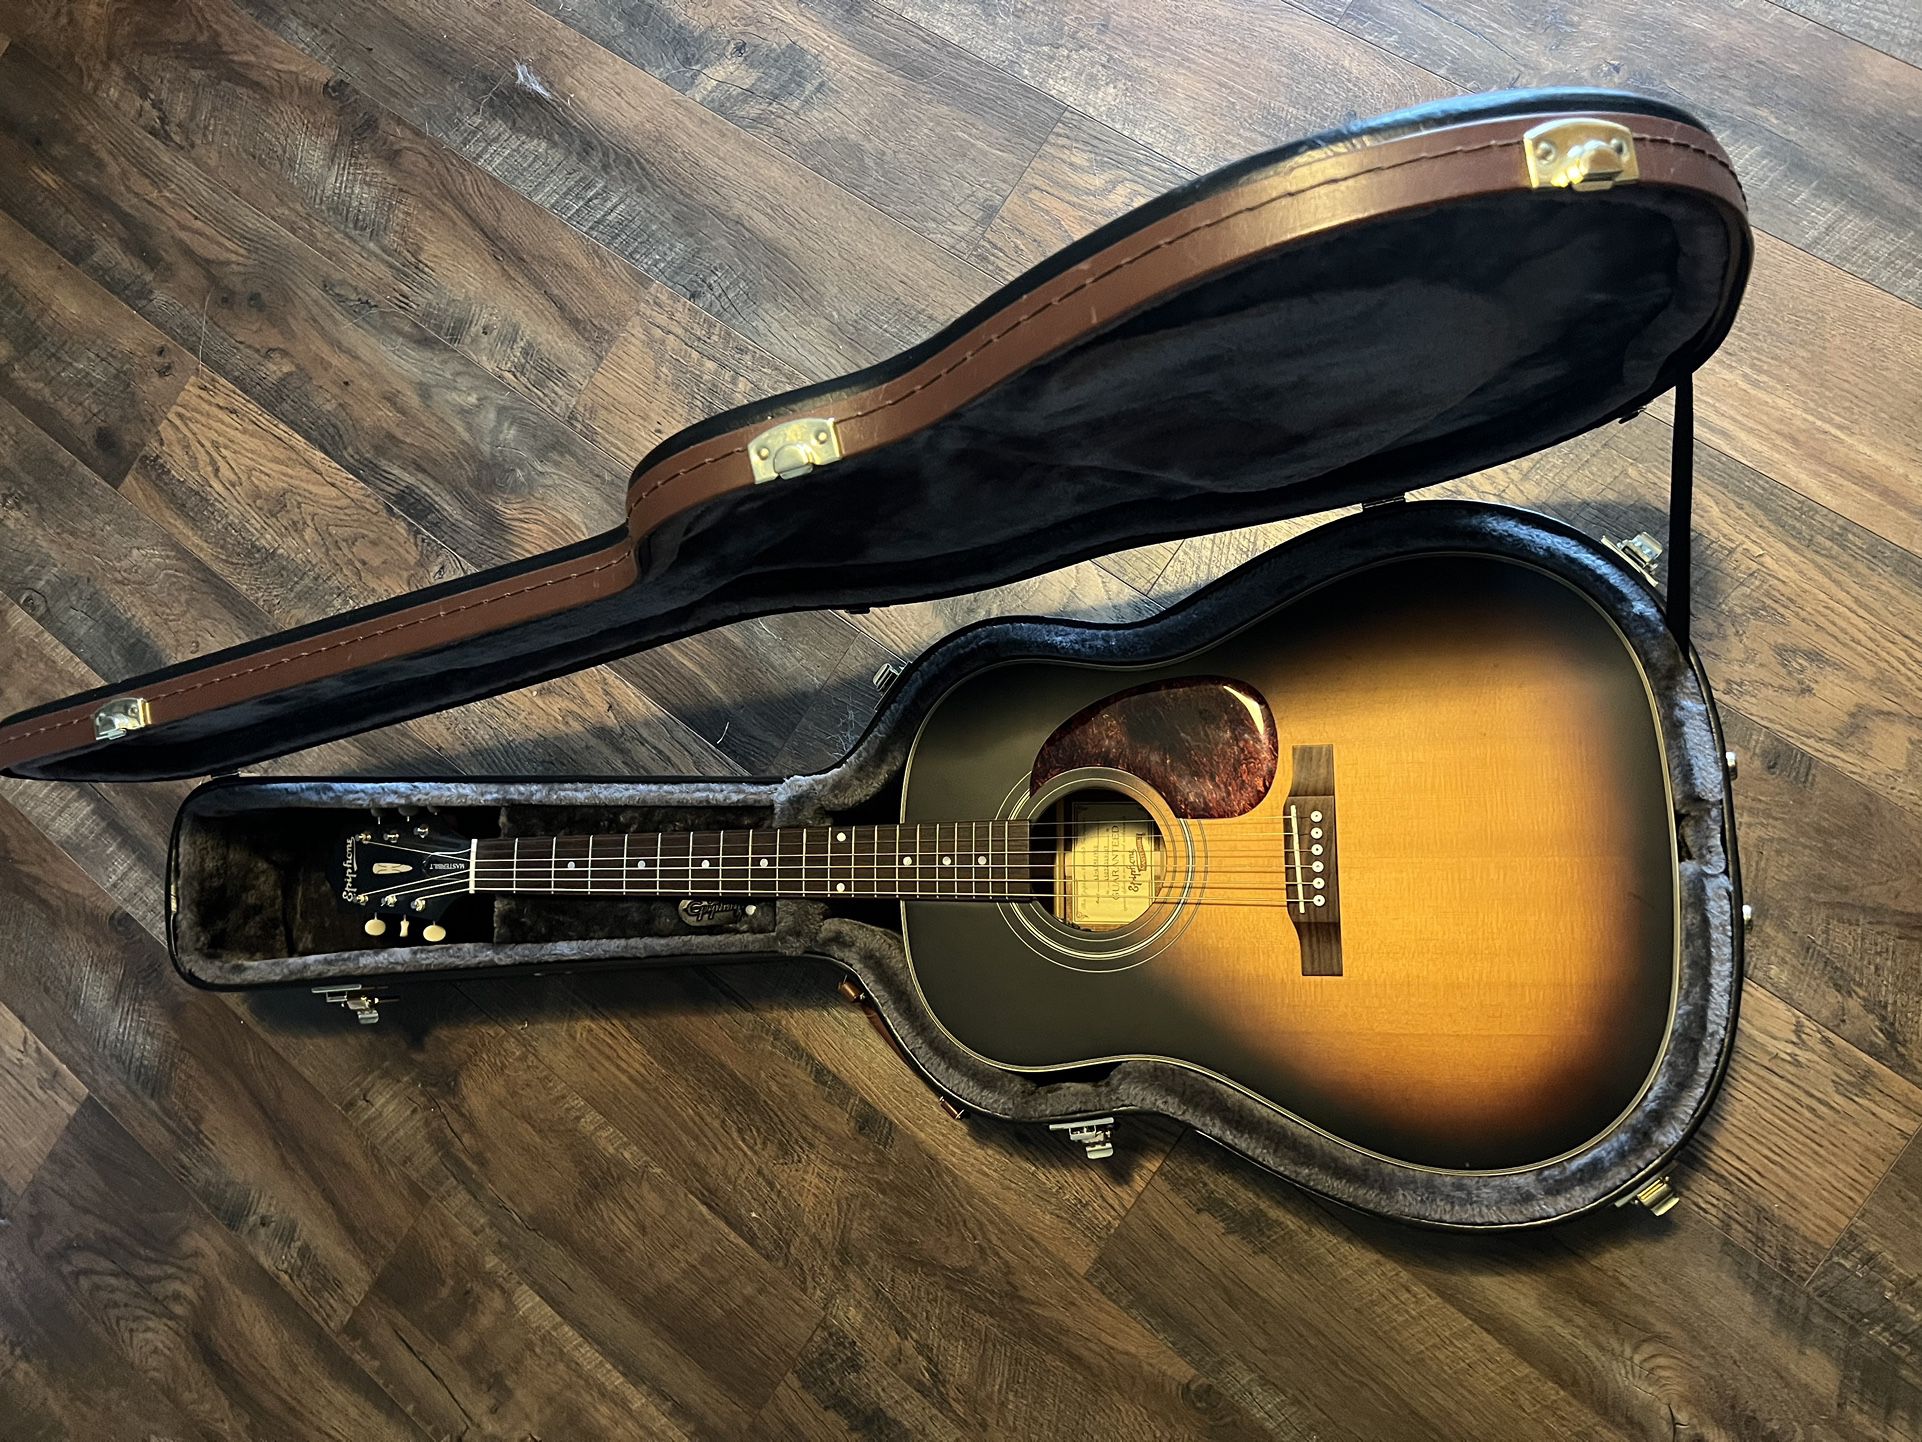 Epiphone Masterbilt Acoustic/Electric Guitar Like-New Condition $550 OBO